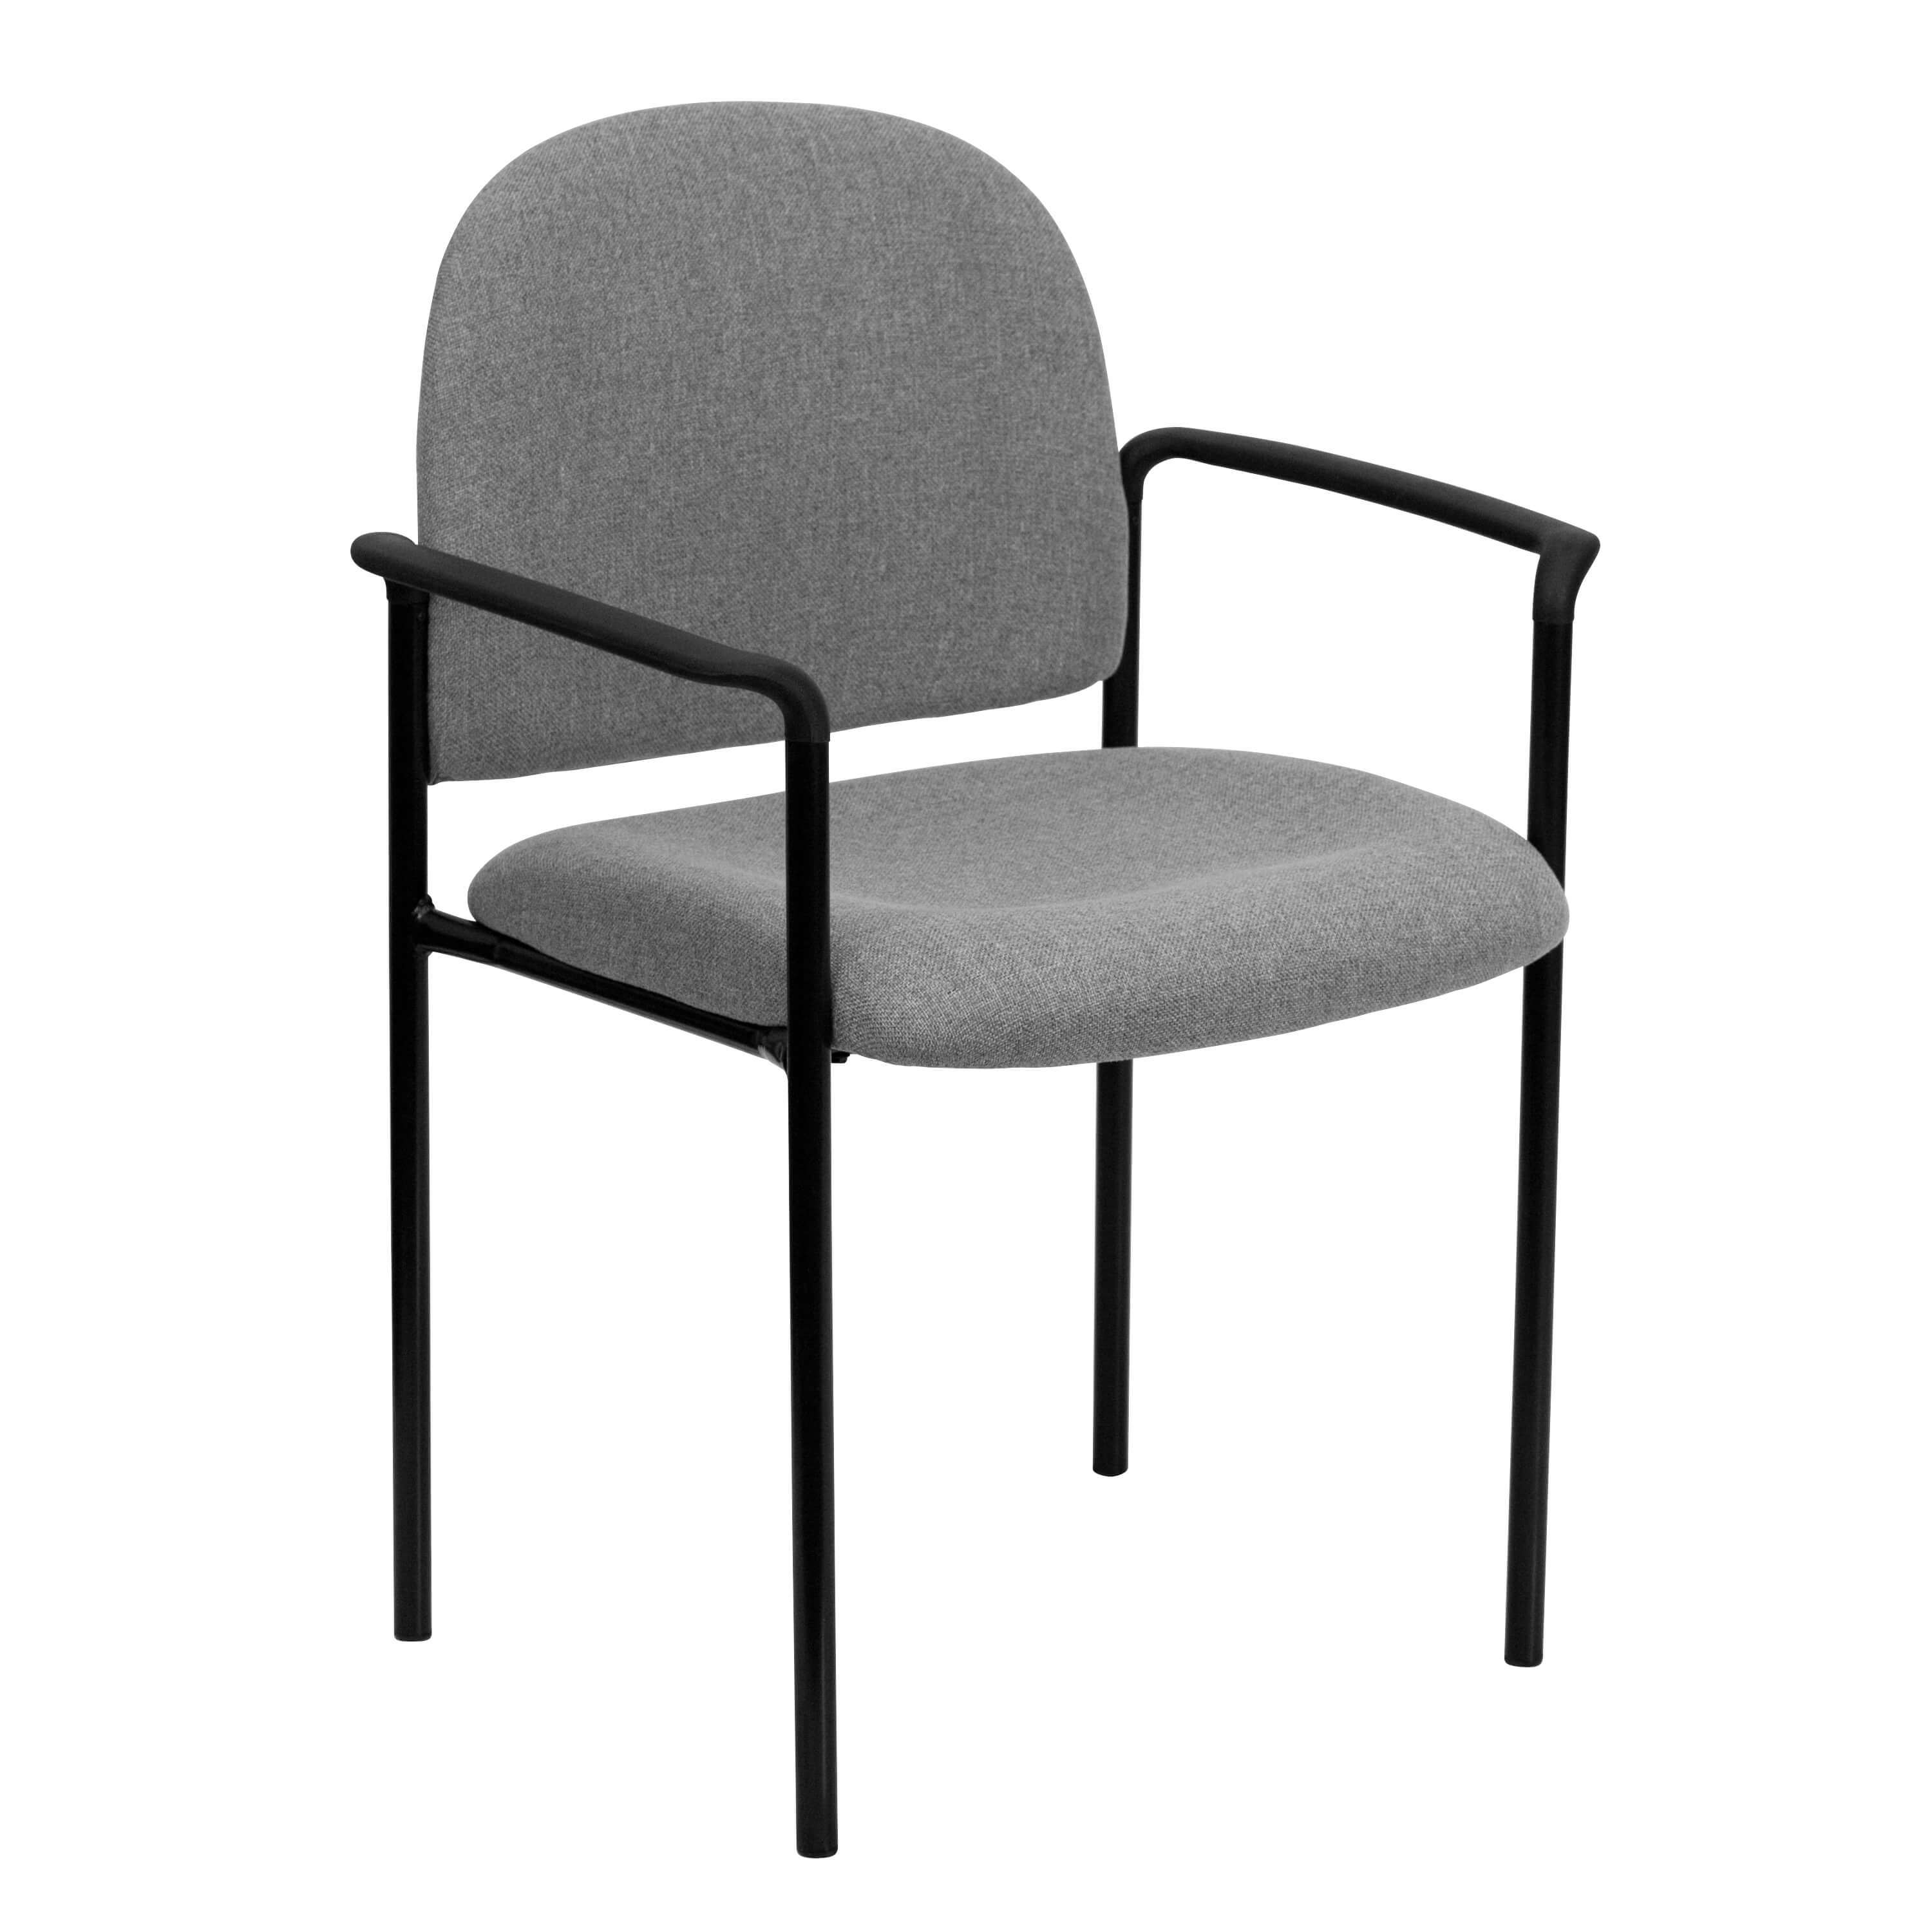 Office waiting room chairs stackable conference chairs